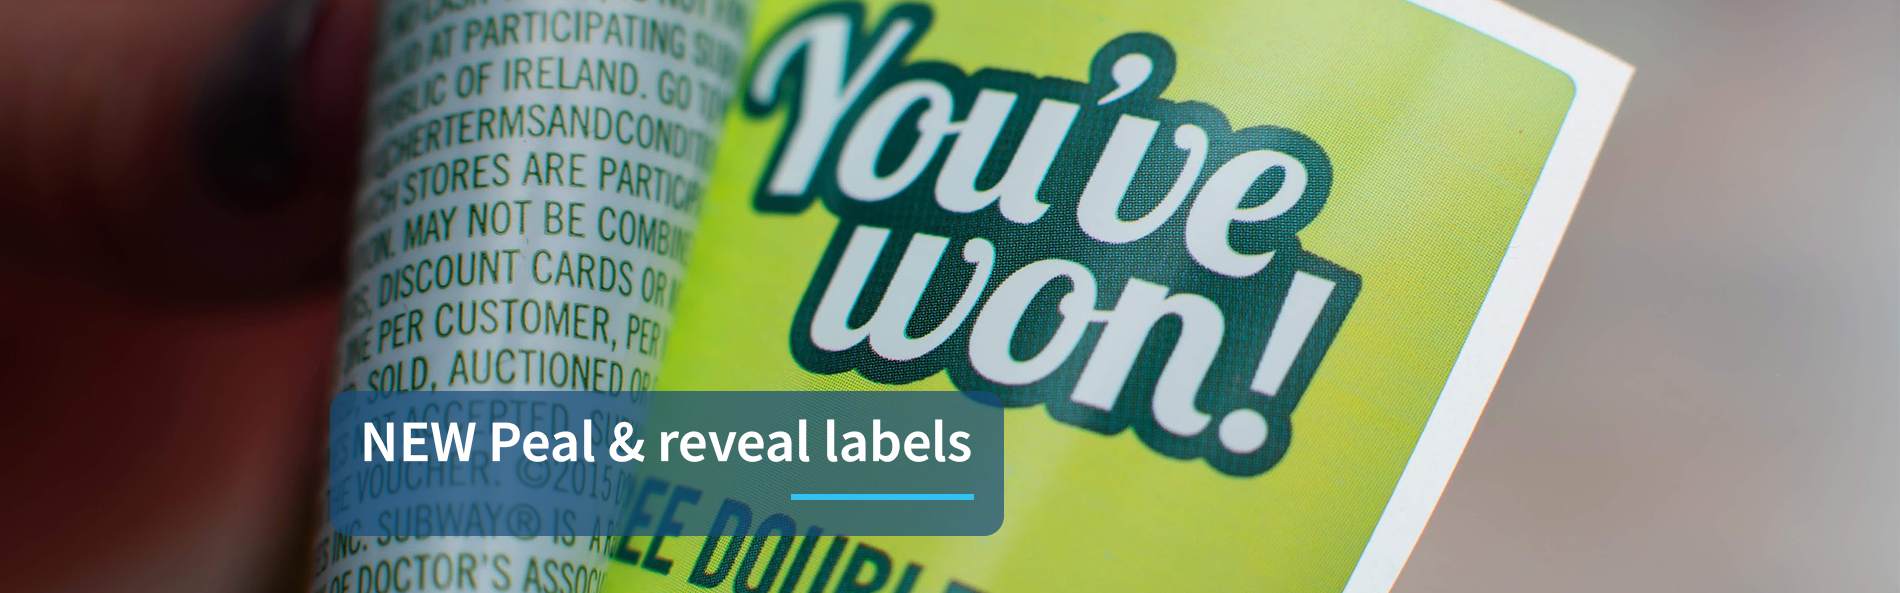 peal and reveal labels